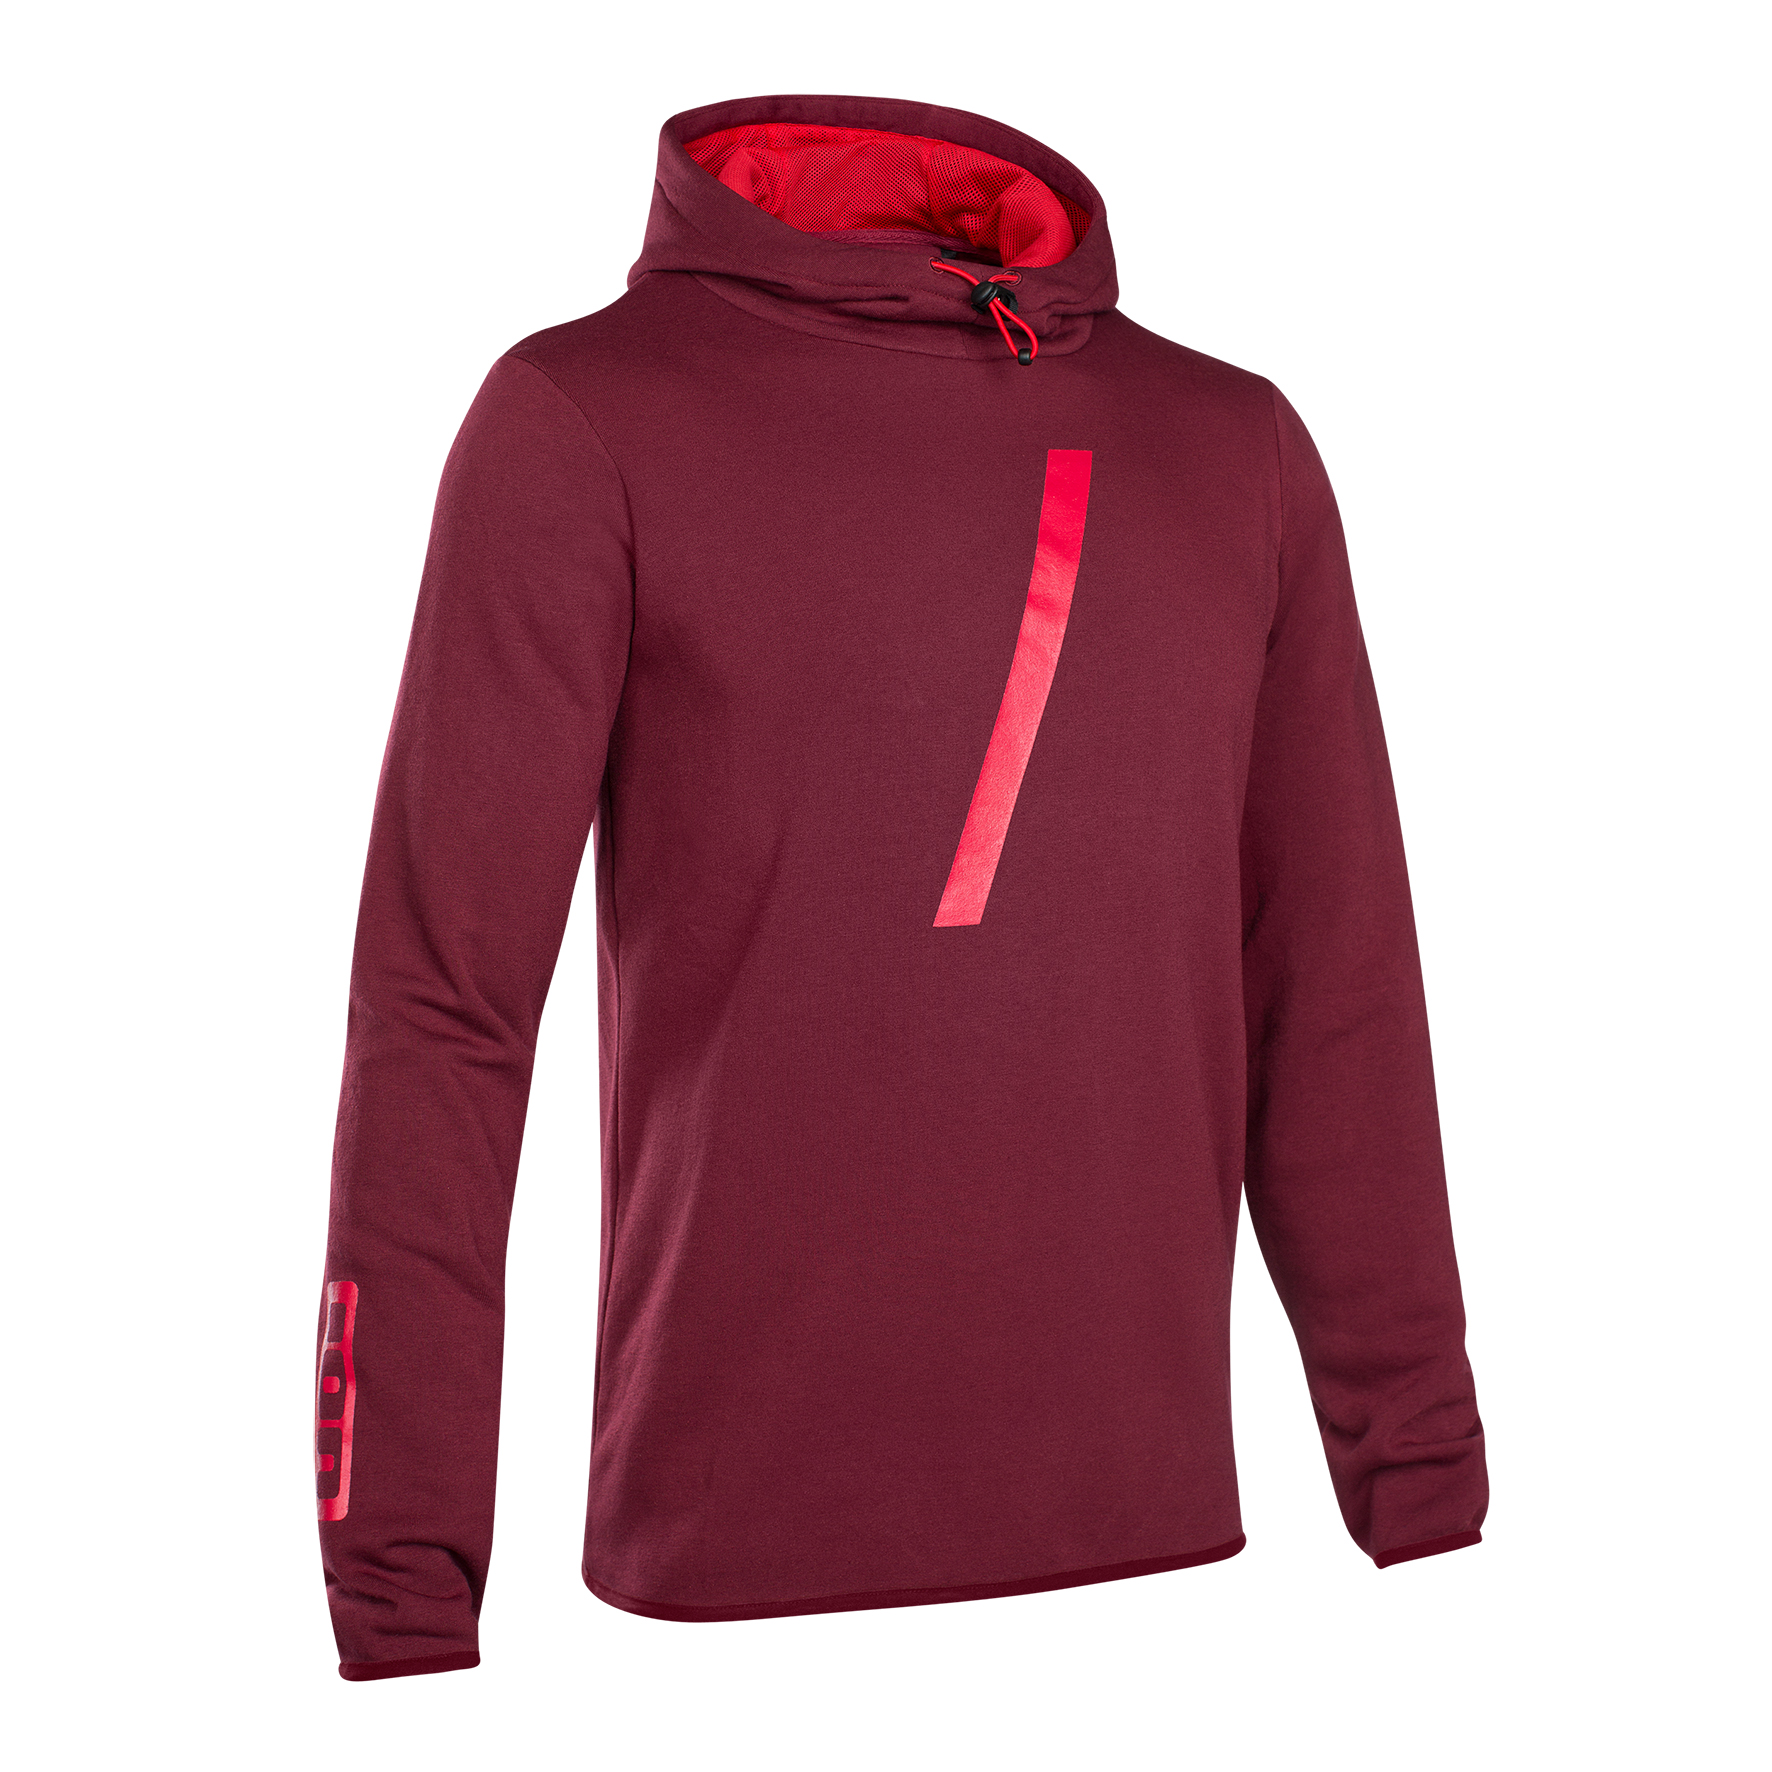 ION Hoody Placid Combat Red